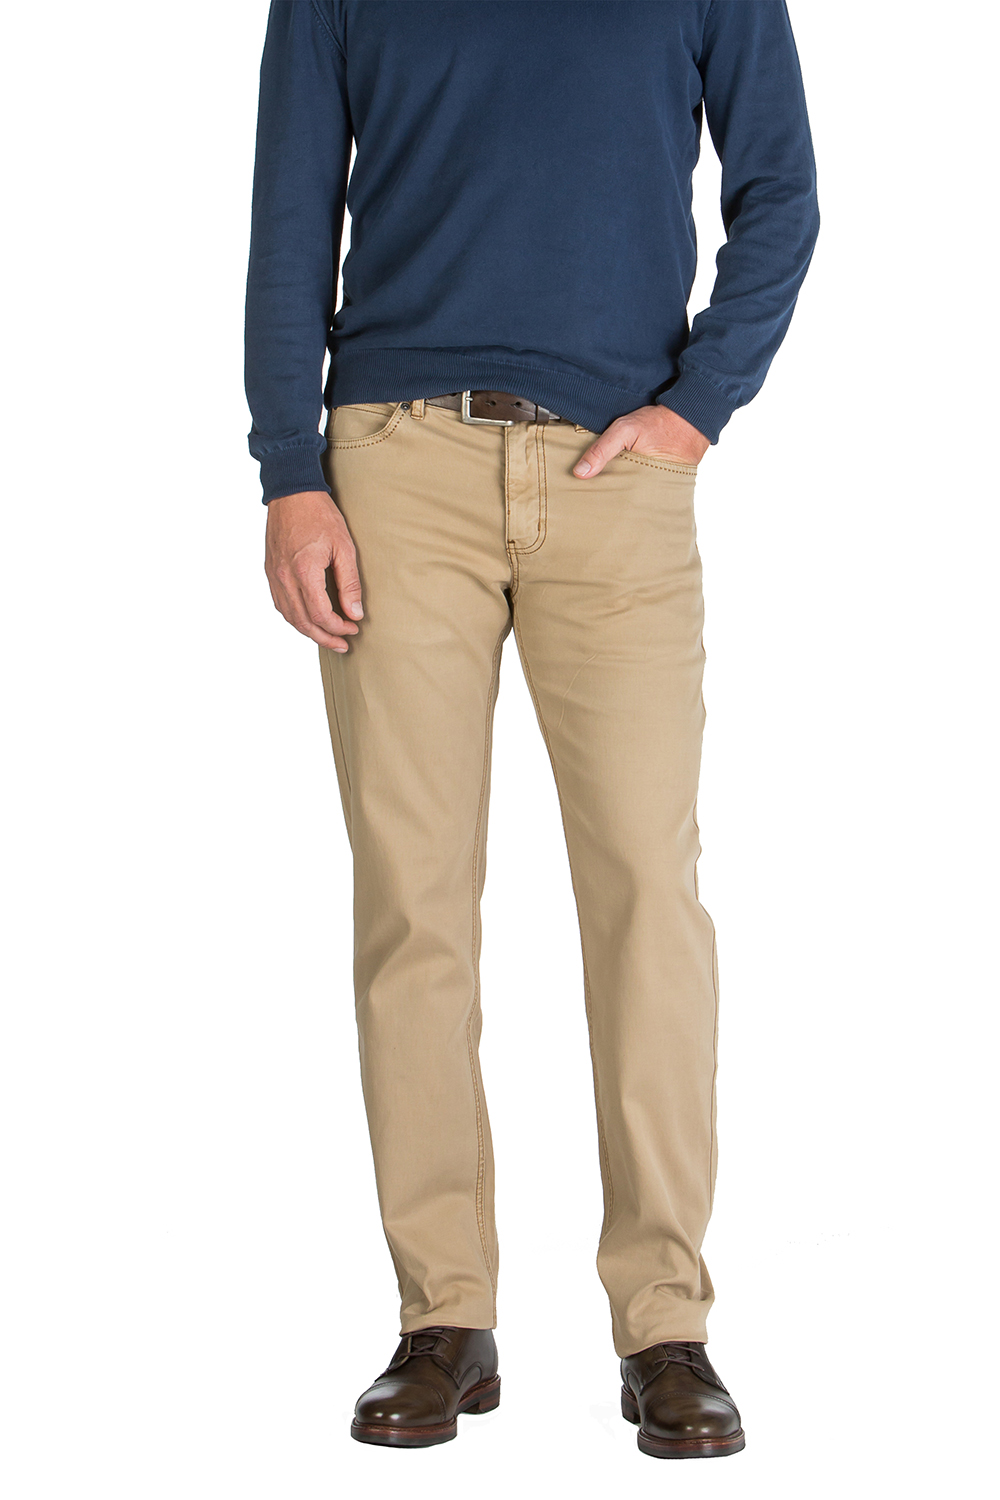 on model front view of the Edward Bedford Hedge 5-pocket pant in color khaki